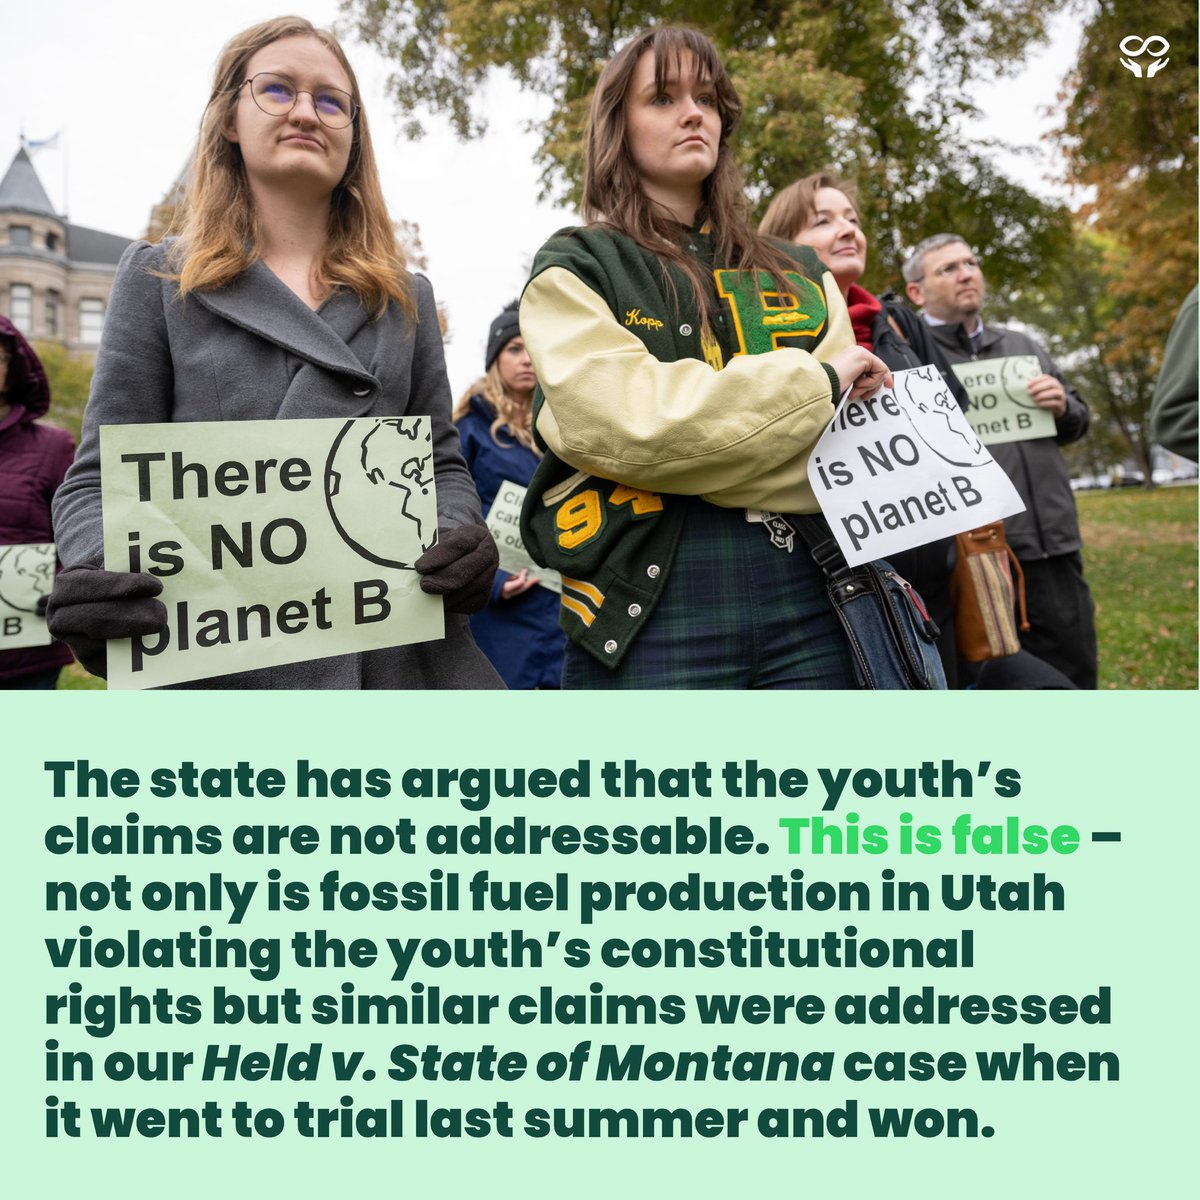 The youth plaintiffs are now preparing for oral arguments before the Utah Supreme later this year. This Earth Week, support these young climate leaders fighting for systemic climate action in Utah by donating to Our Children’s Trust. Give today: bit.ly/GiveOCT #YouthvGov